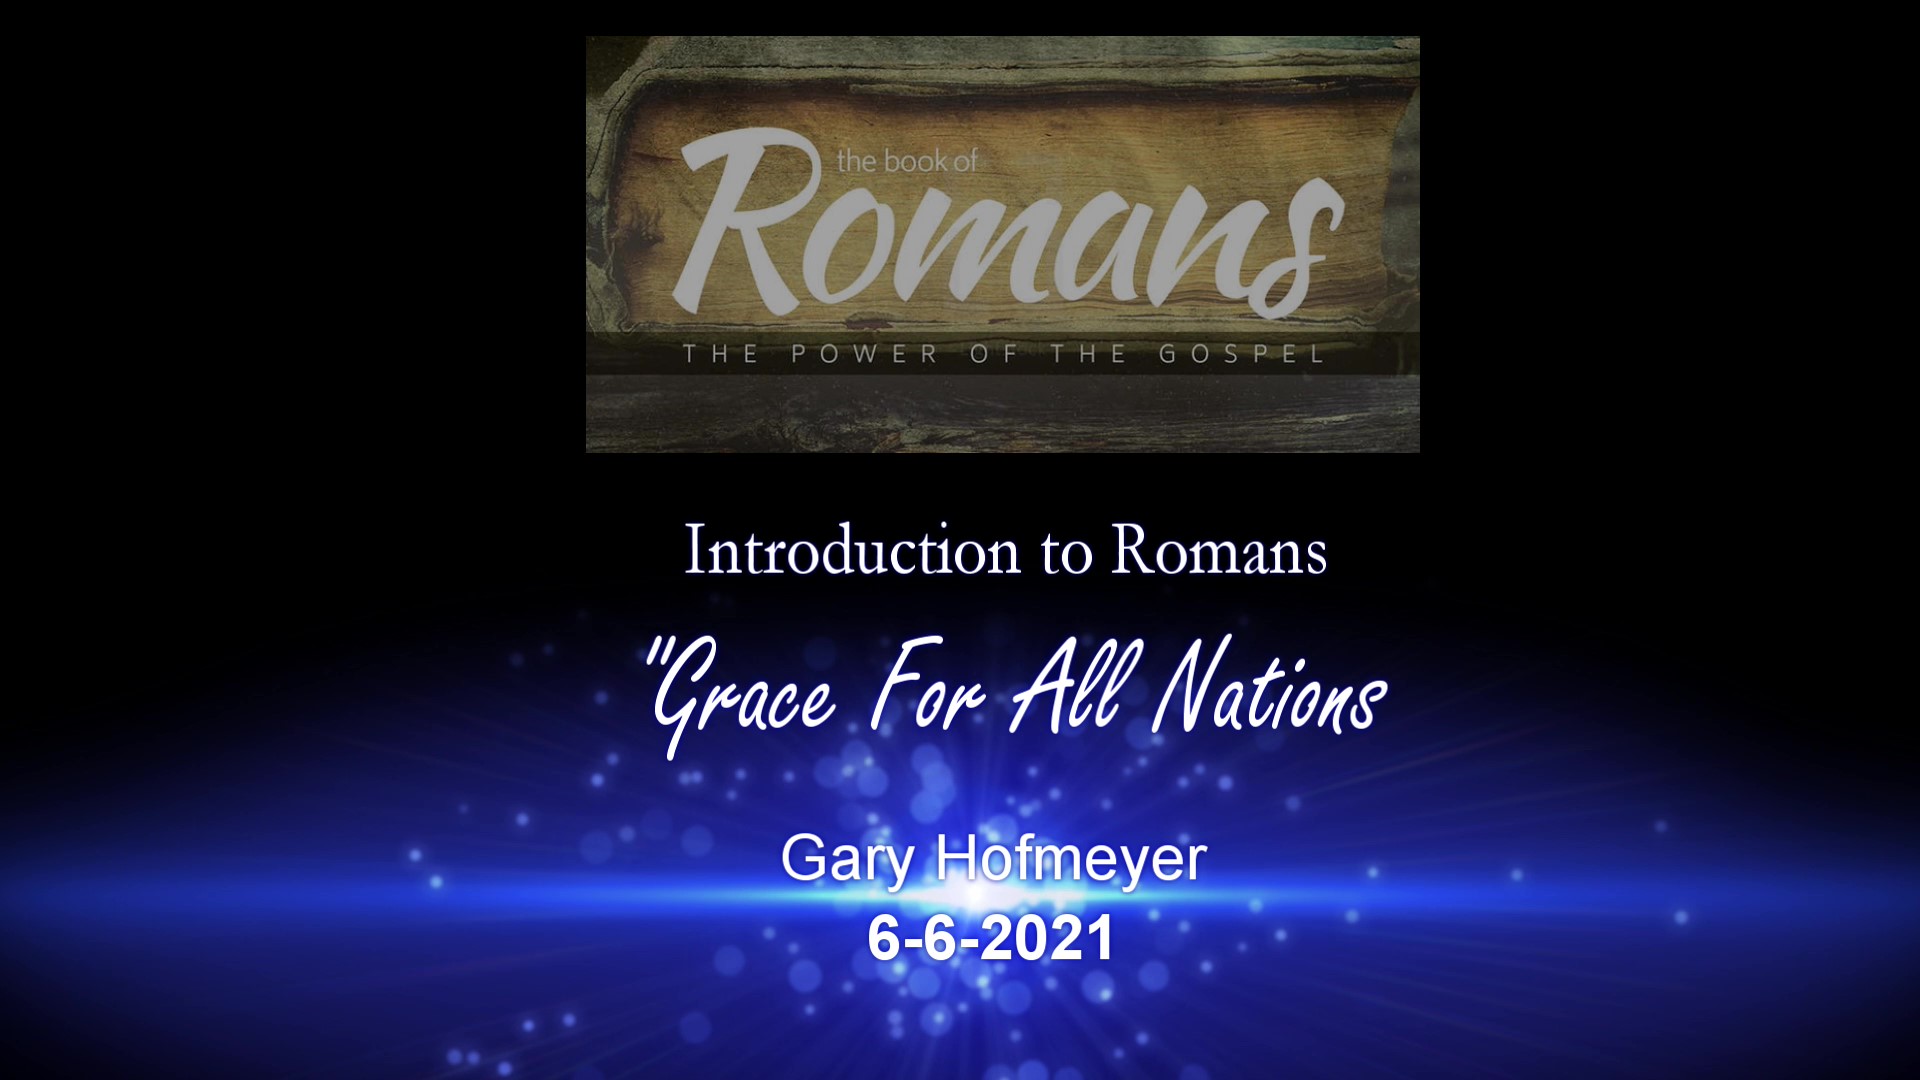 Grace for All Nations 6-6-2021